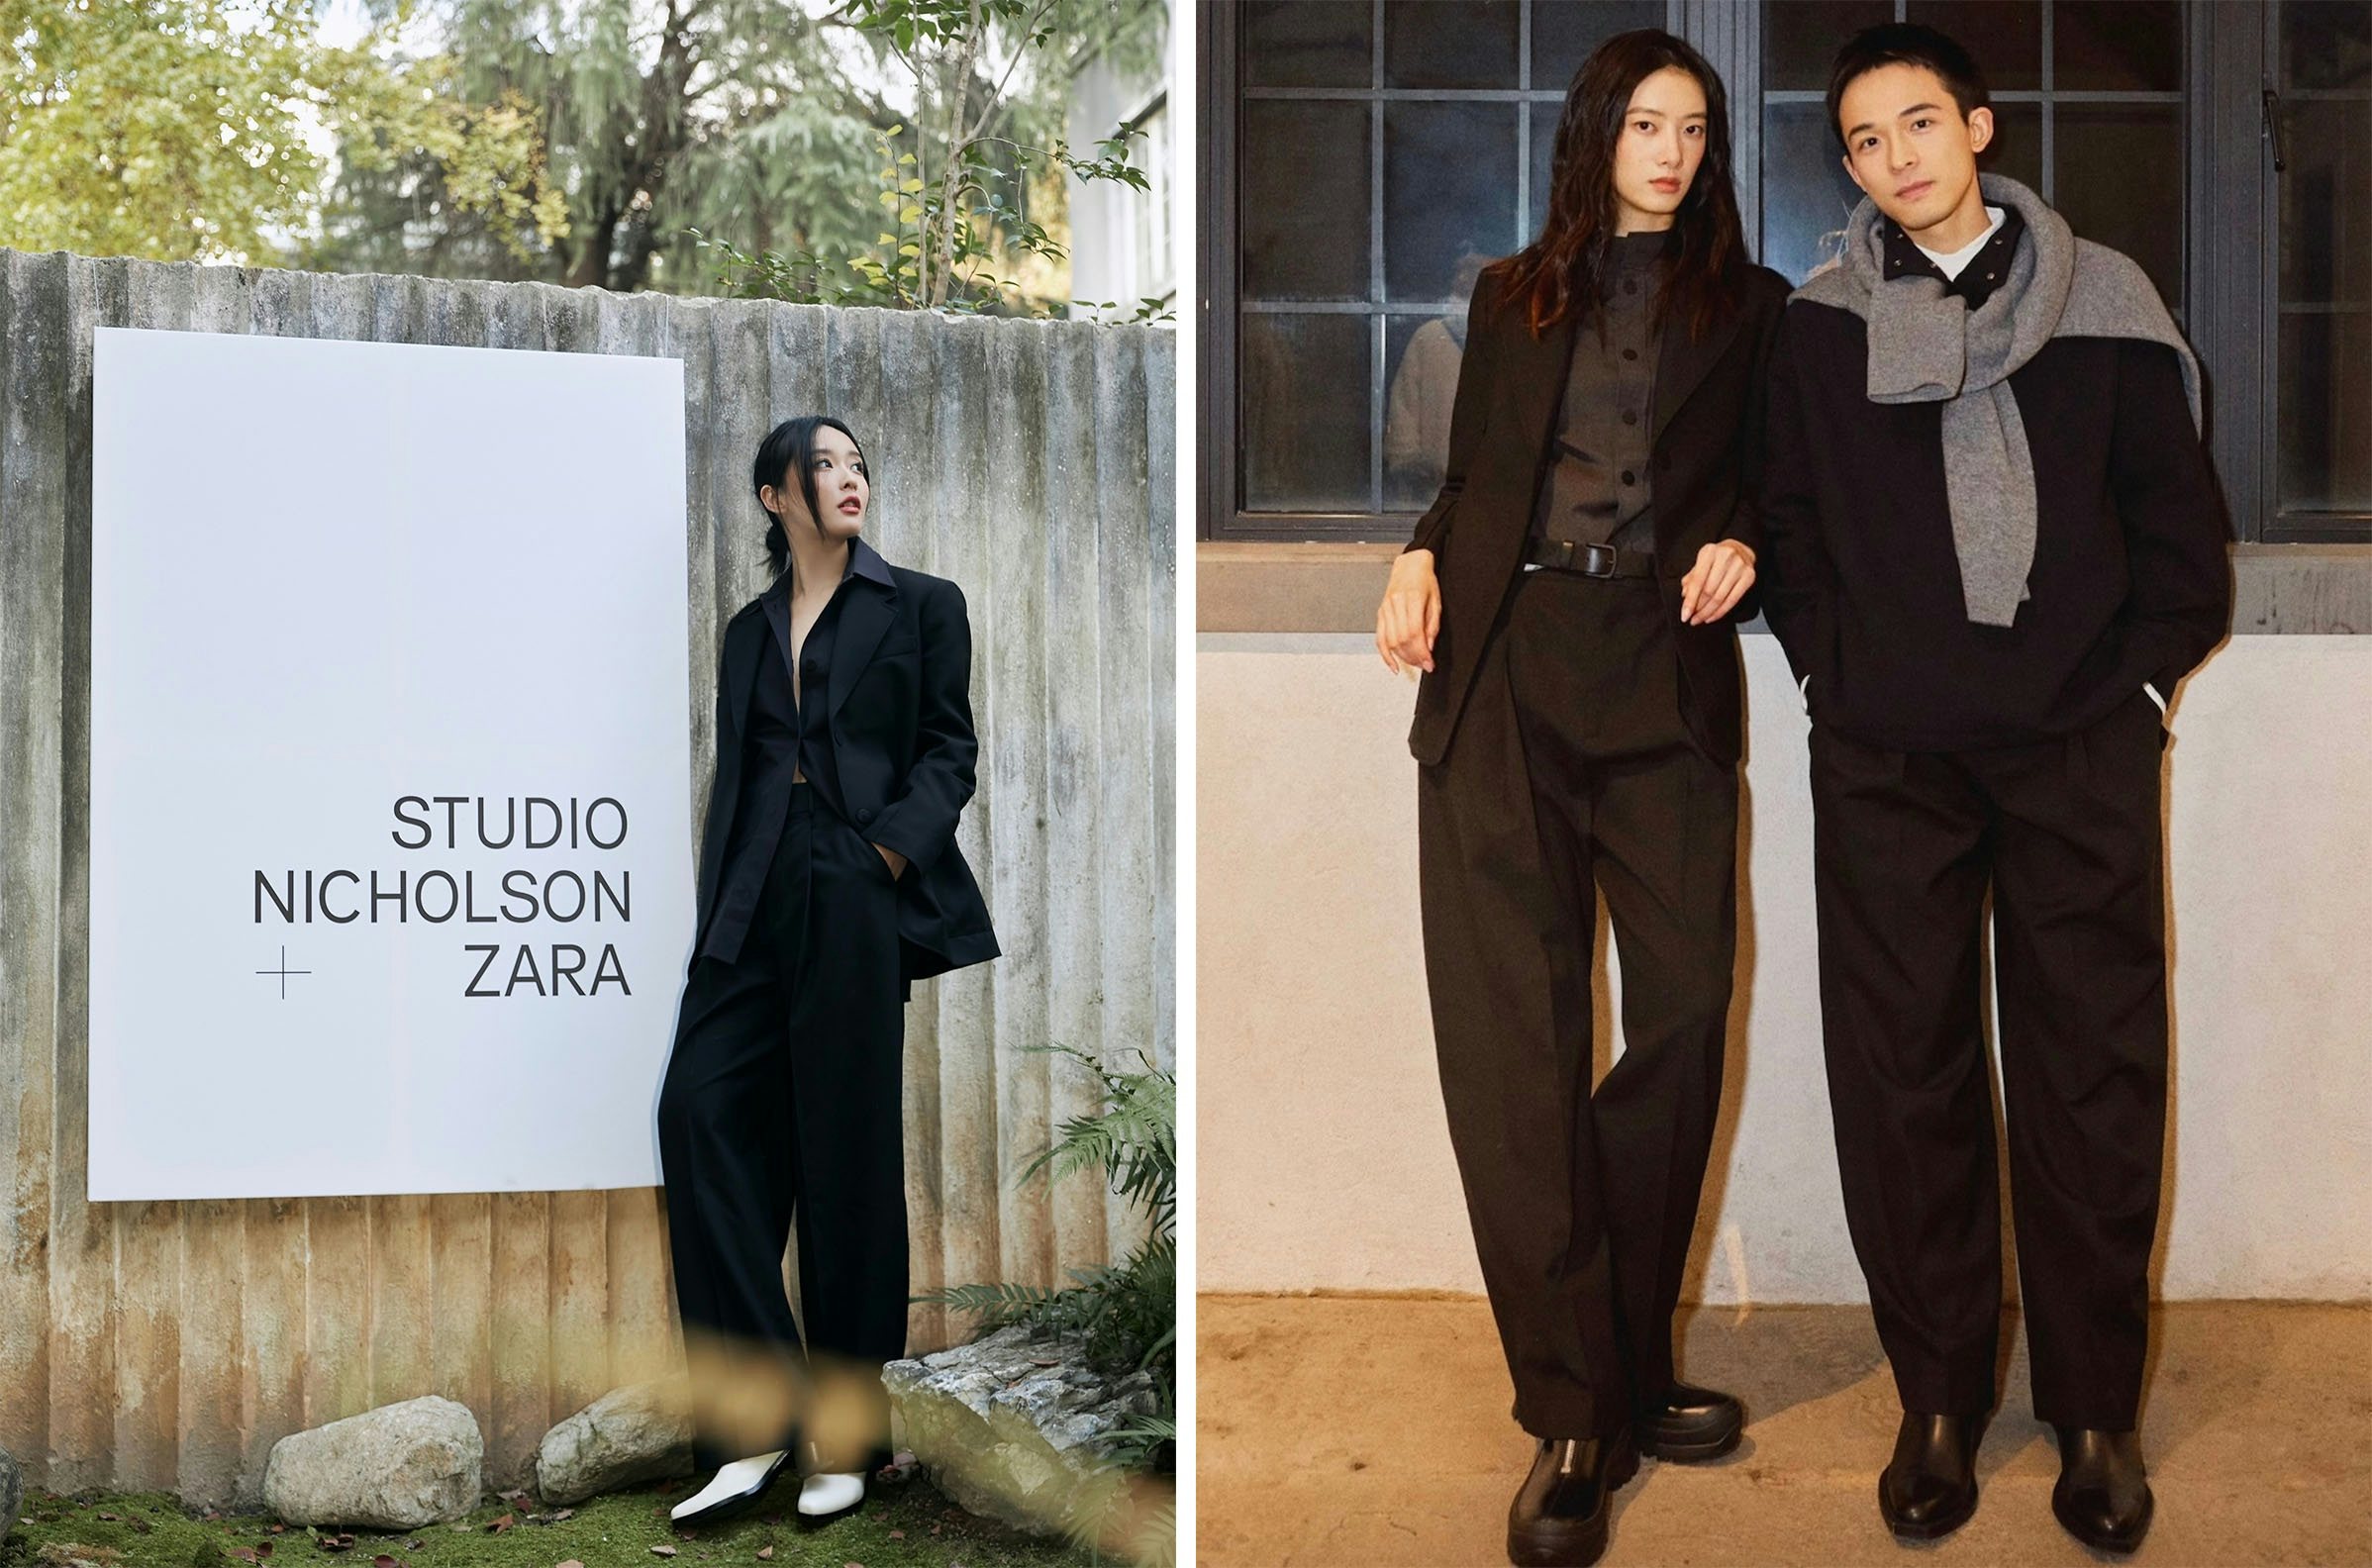 Chinese KOLs attend the Zara x Studio Nicholson pop-up dressed in apparel from the brand's collection. Photo: Zara